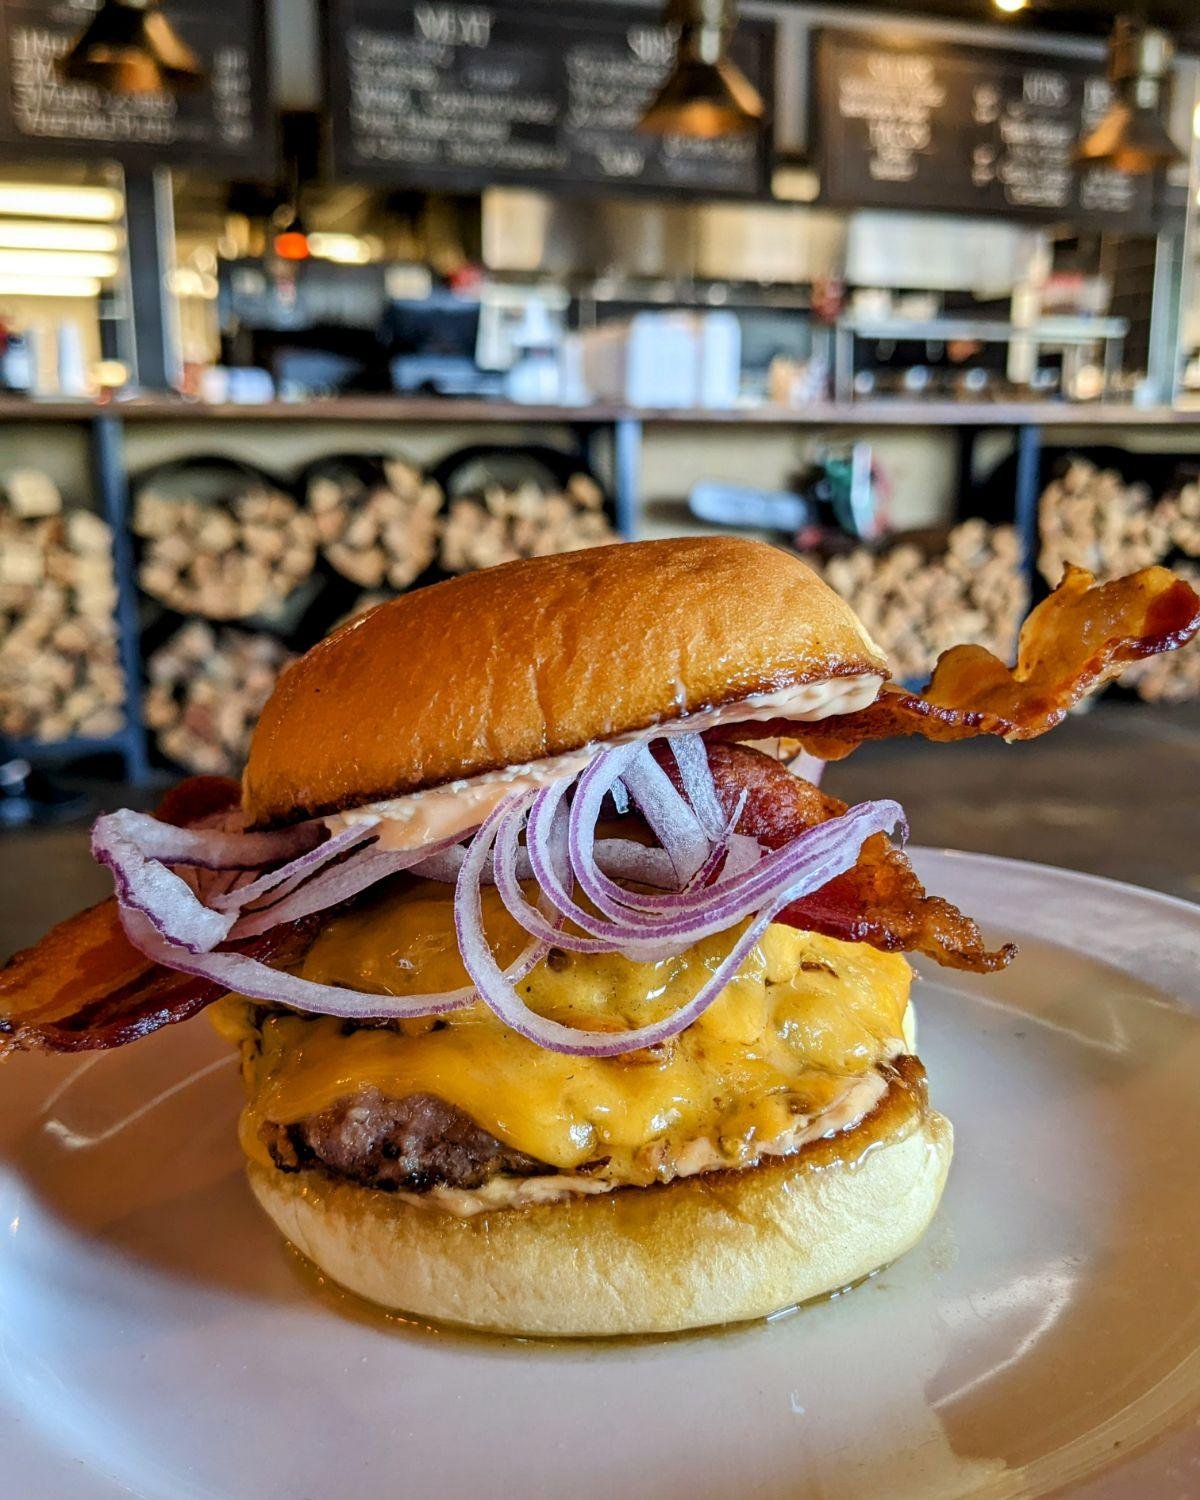 Better start making your dinner plans! This burger is drool worthy.

THURSDAY (4/25) SMOKEHOUSE SPECIAL
ALL DAY- - - Double smash burger, cheddar cheese, bacon, thin-sliced red onion, buffalo garlic mayo

#smokemeateveryday #weeklyspecials #AlamanceN